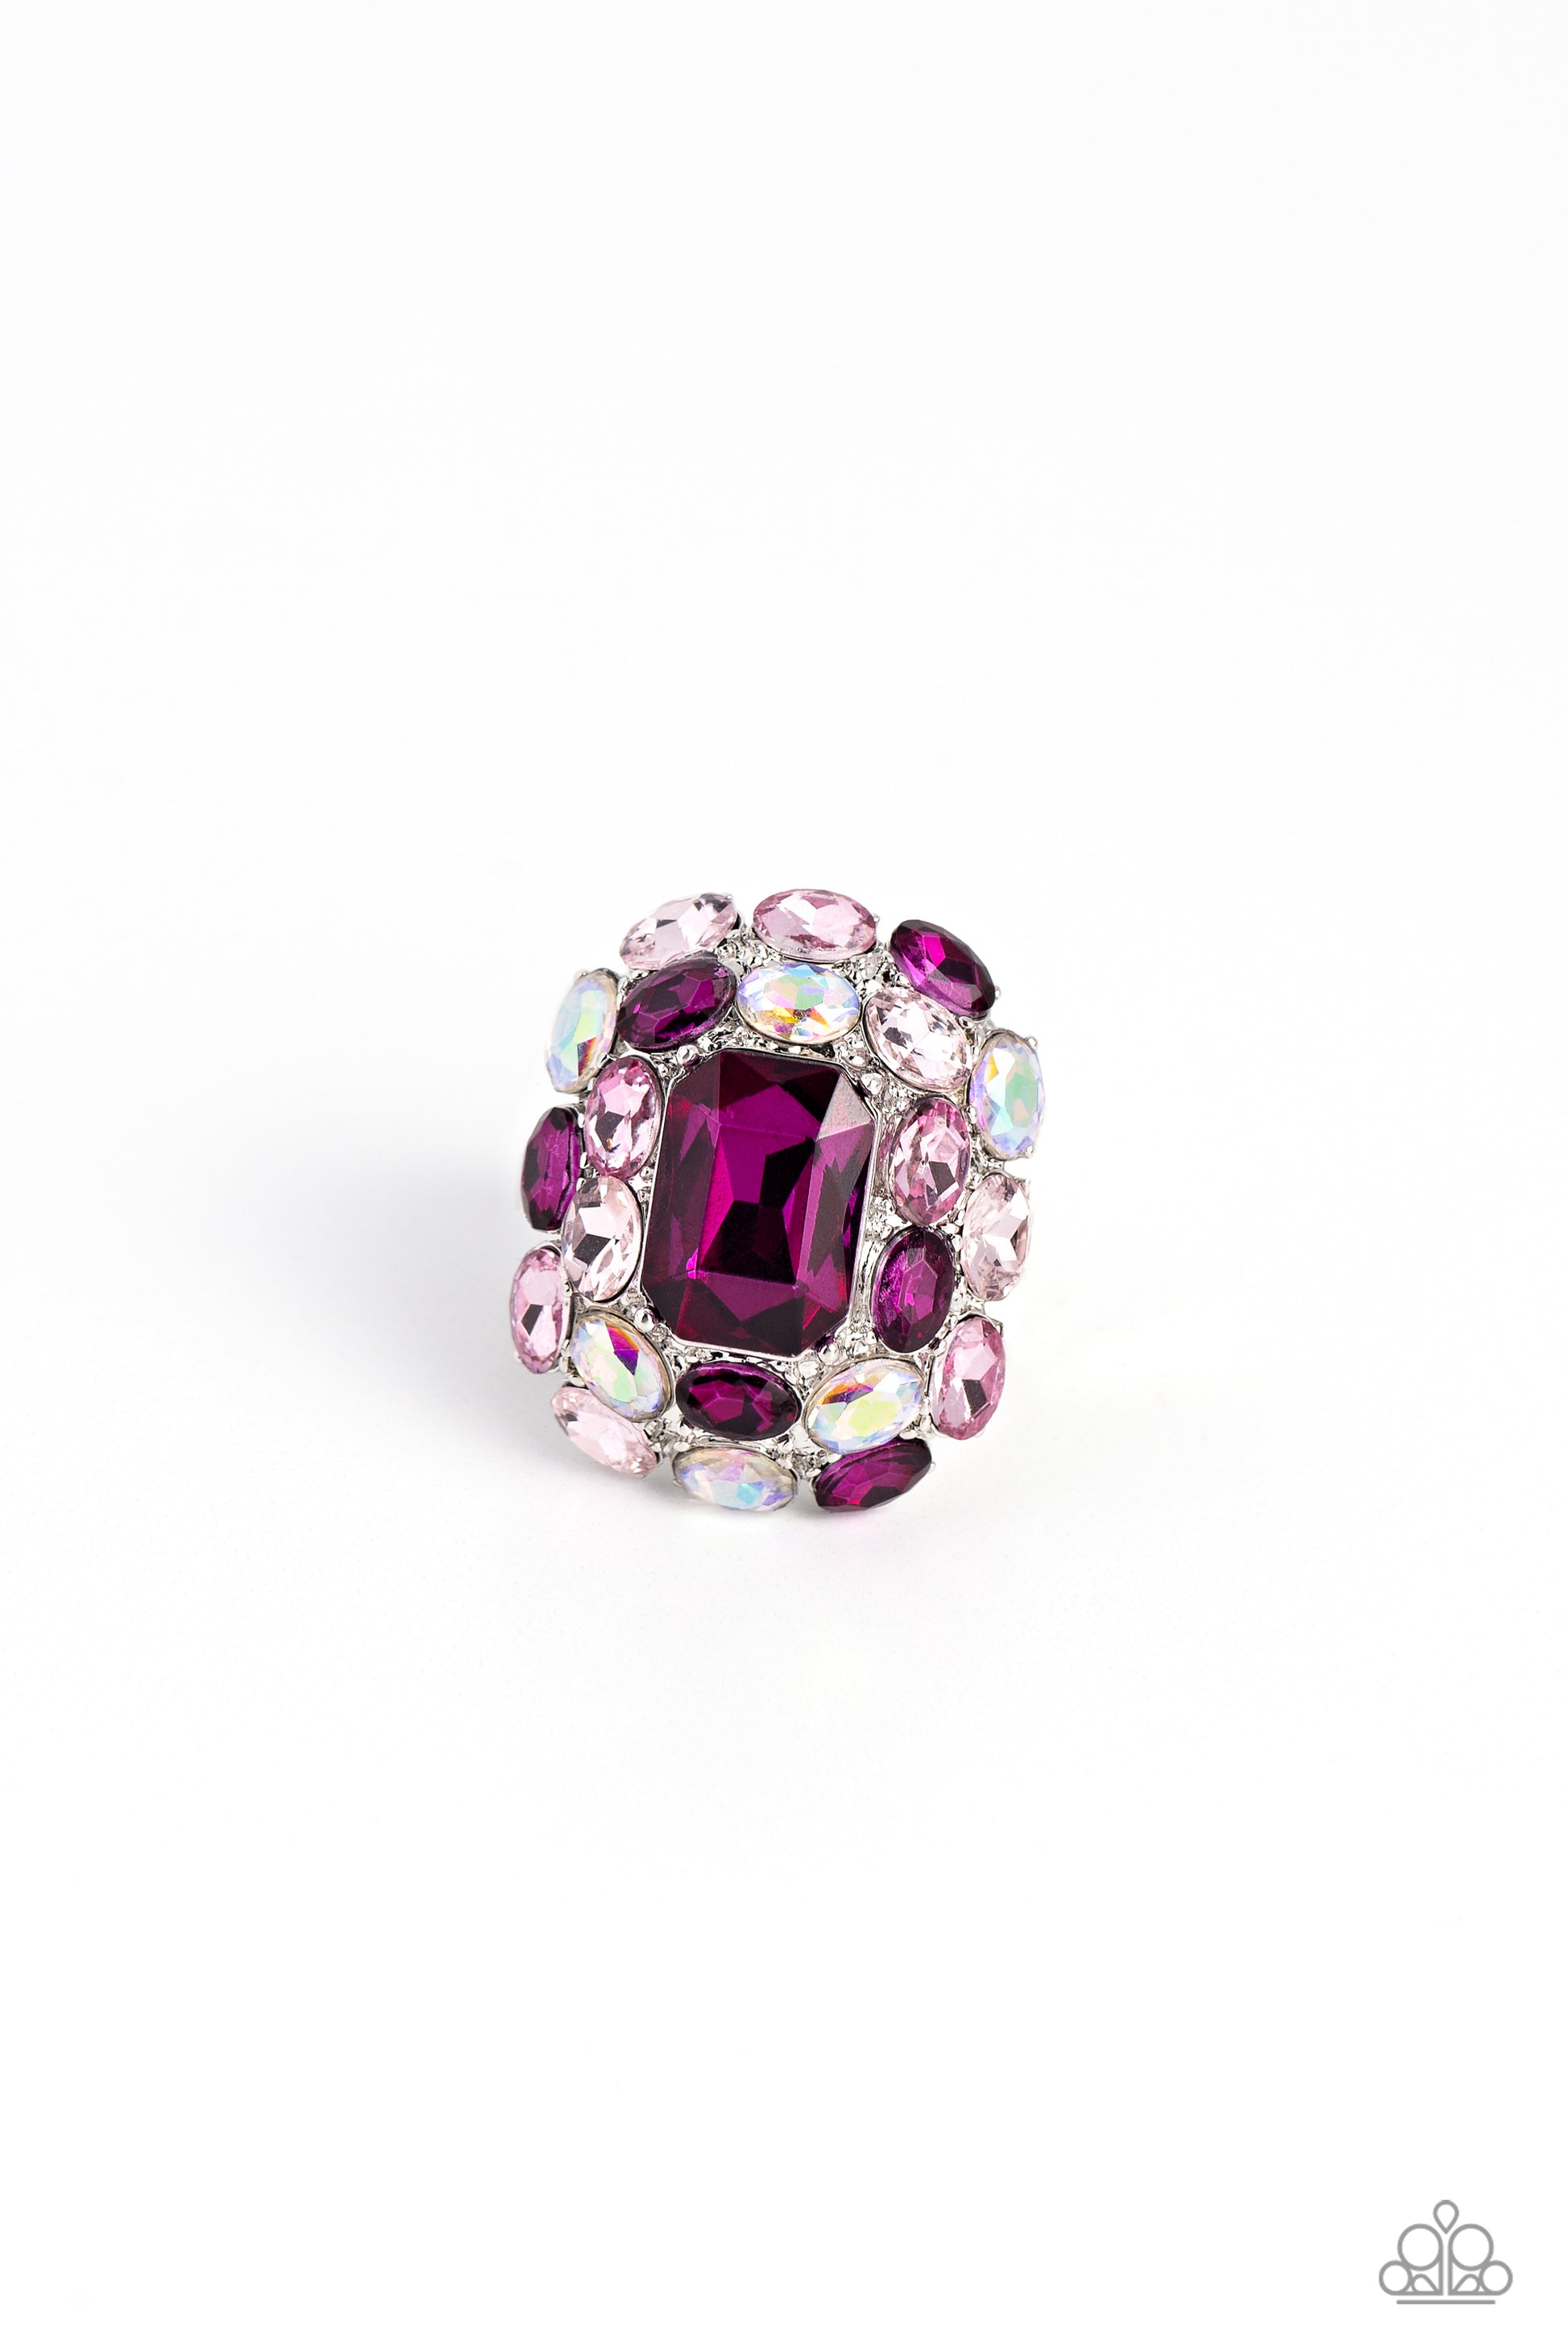 Paparazzi Accessories - Perfectly Park Avenue - Pink Rings faceted radiant-cut fuchsia gem is pressed into an elaborate silver frame filled with blinding oval-cut gems in varying shades and opacities of pink gems for a dynamically colorful statement atop the finger. Features a stretchy band for a flexible fit. Due to its prismatic palette, color may vary.  Sold as one individual ring.